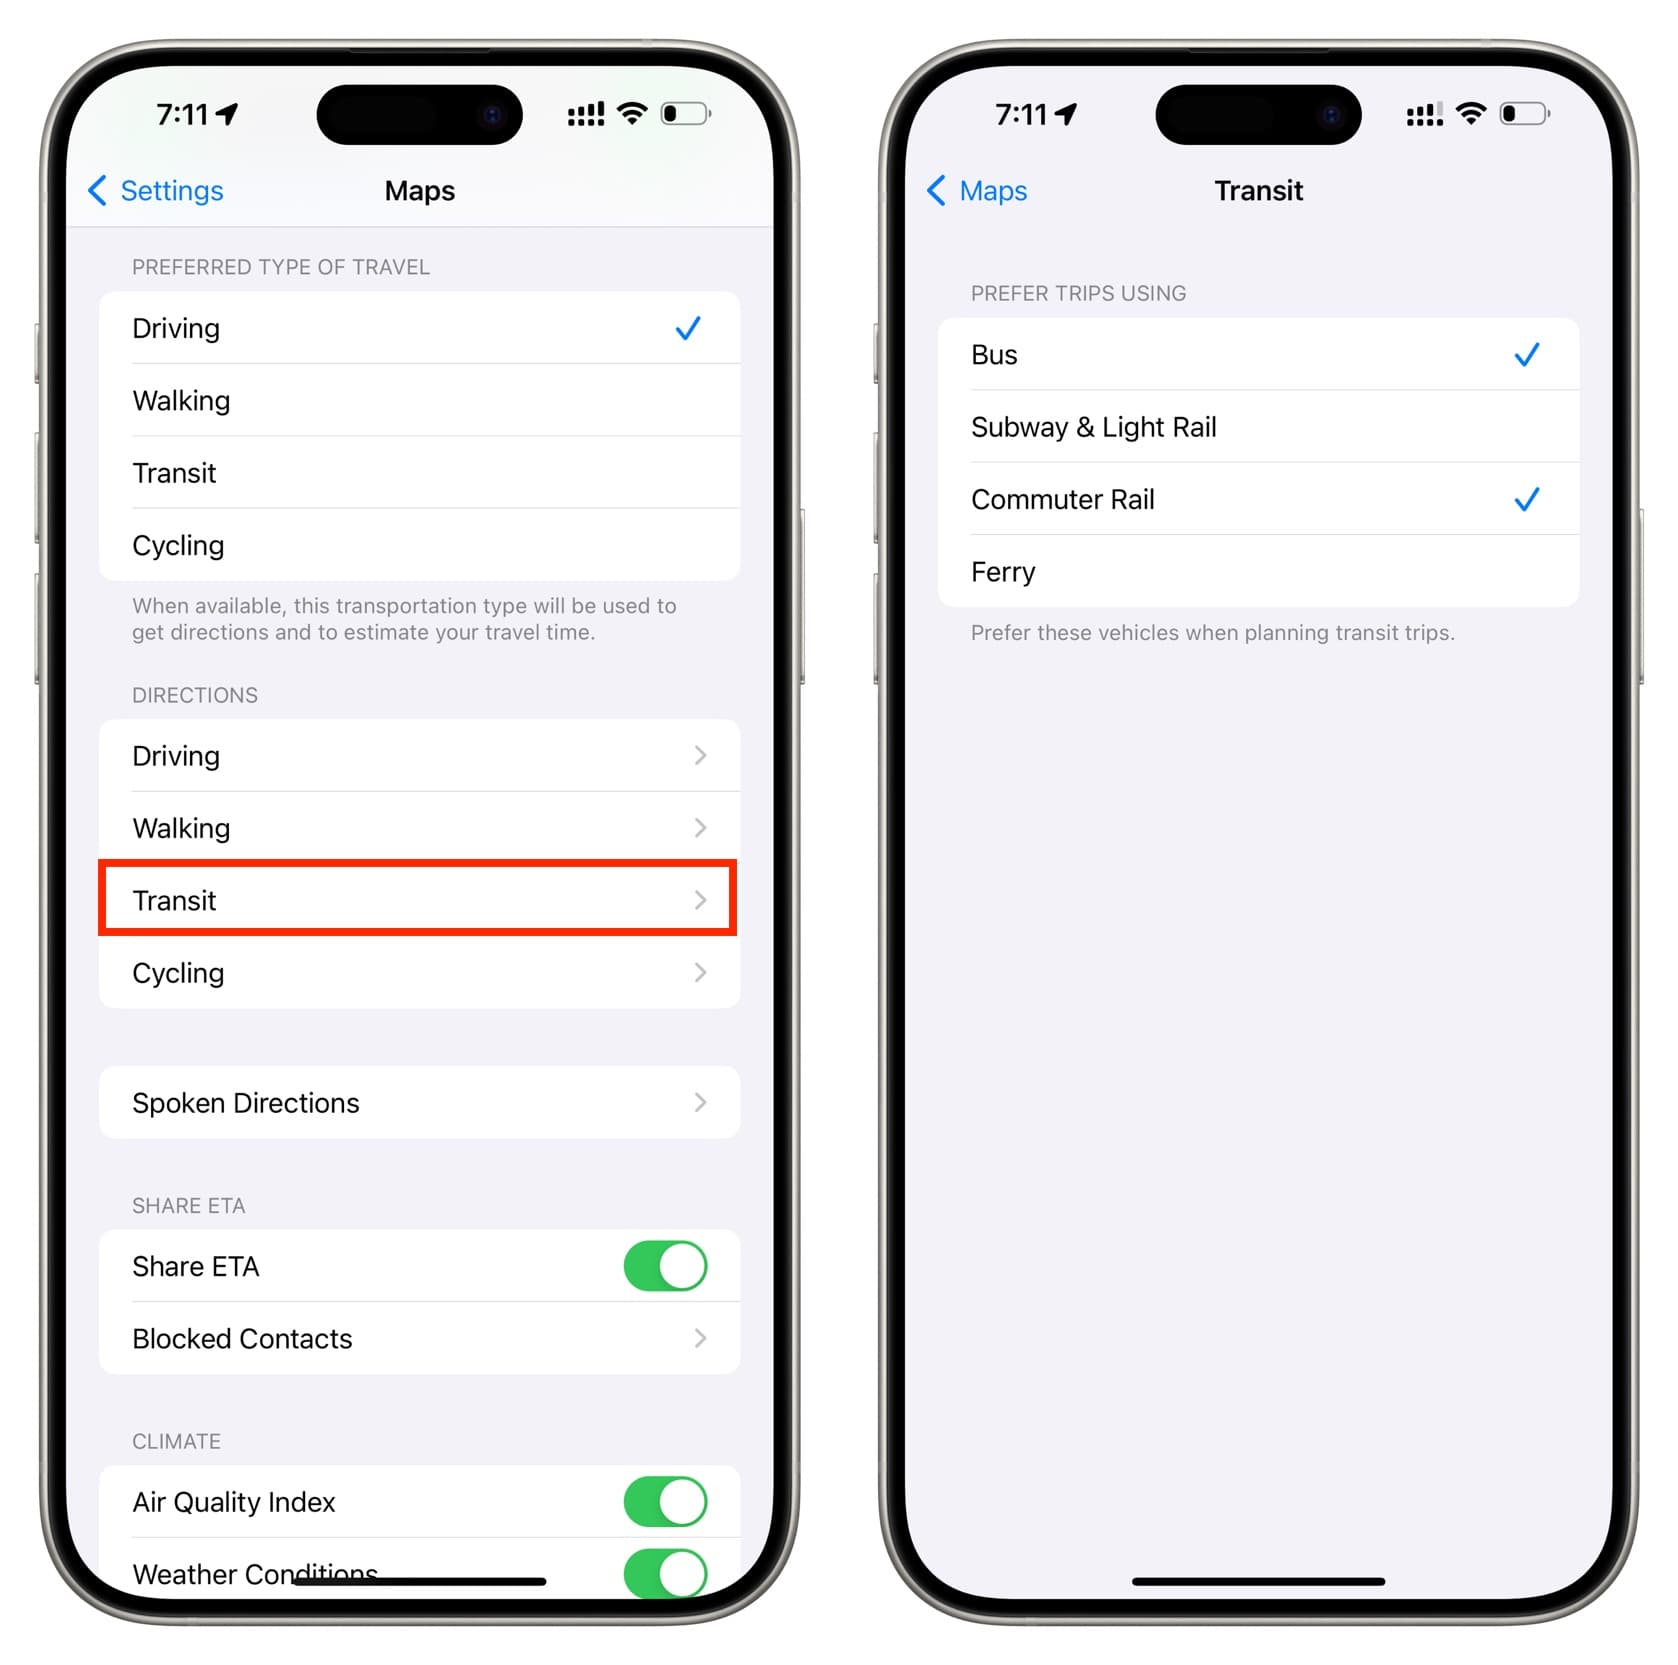 Customize Transit in Maps Settings on iPhone